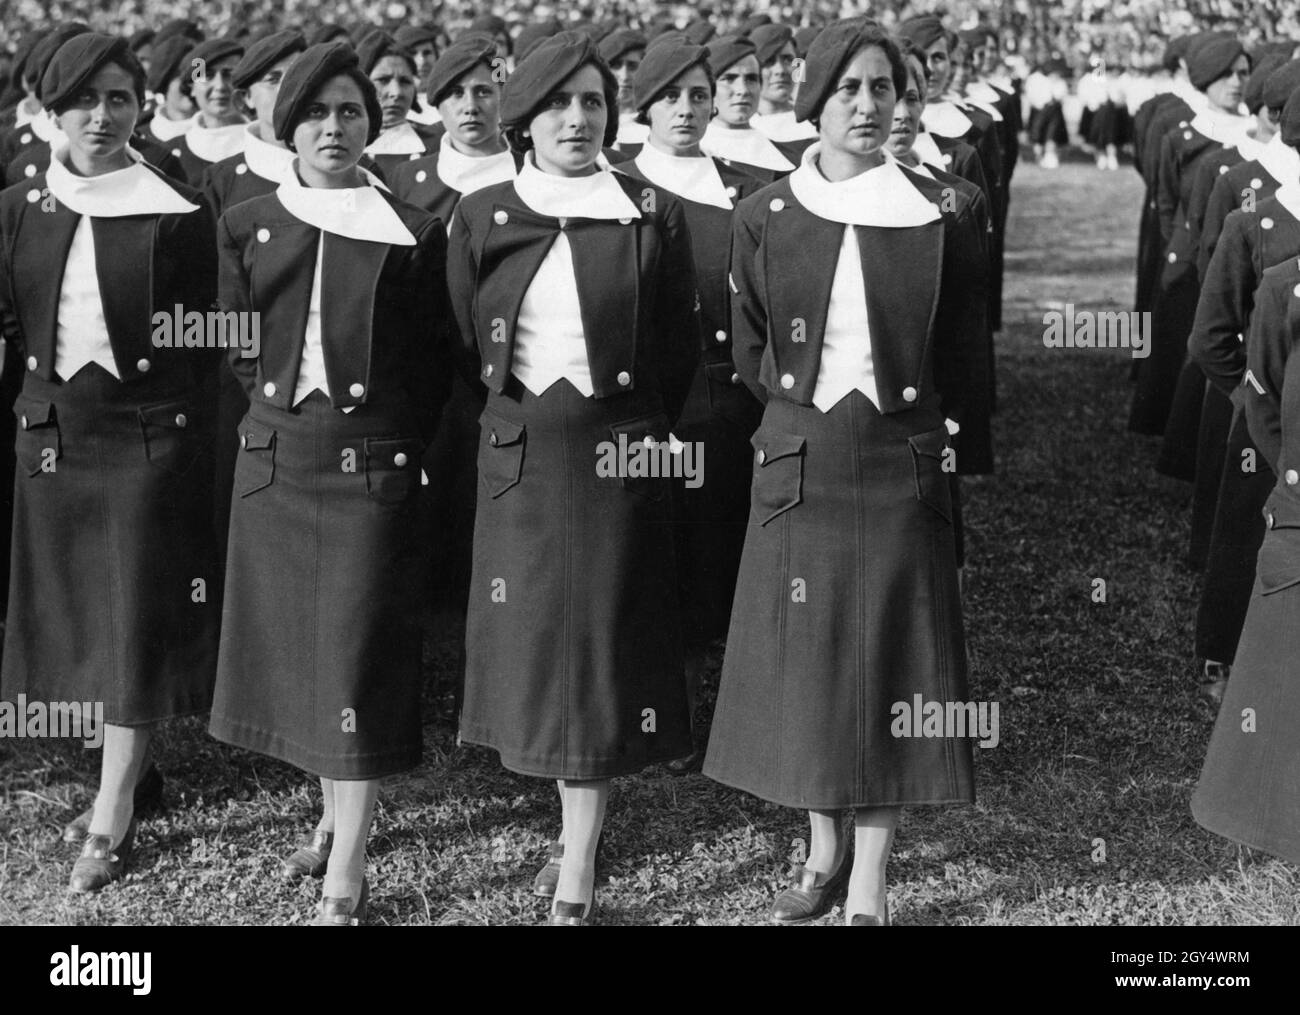 'Young women belonging to the ''Giovani Fasciste'' gathered for a roll call in an Italian stadium in 1937. The group leader stands in front on the right. The Giovani Fasciste included women aged 18 and over. [automated translation]' Stock Photo